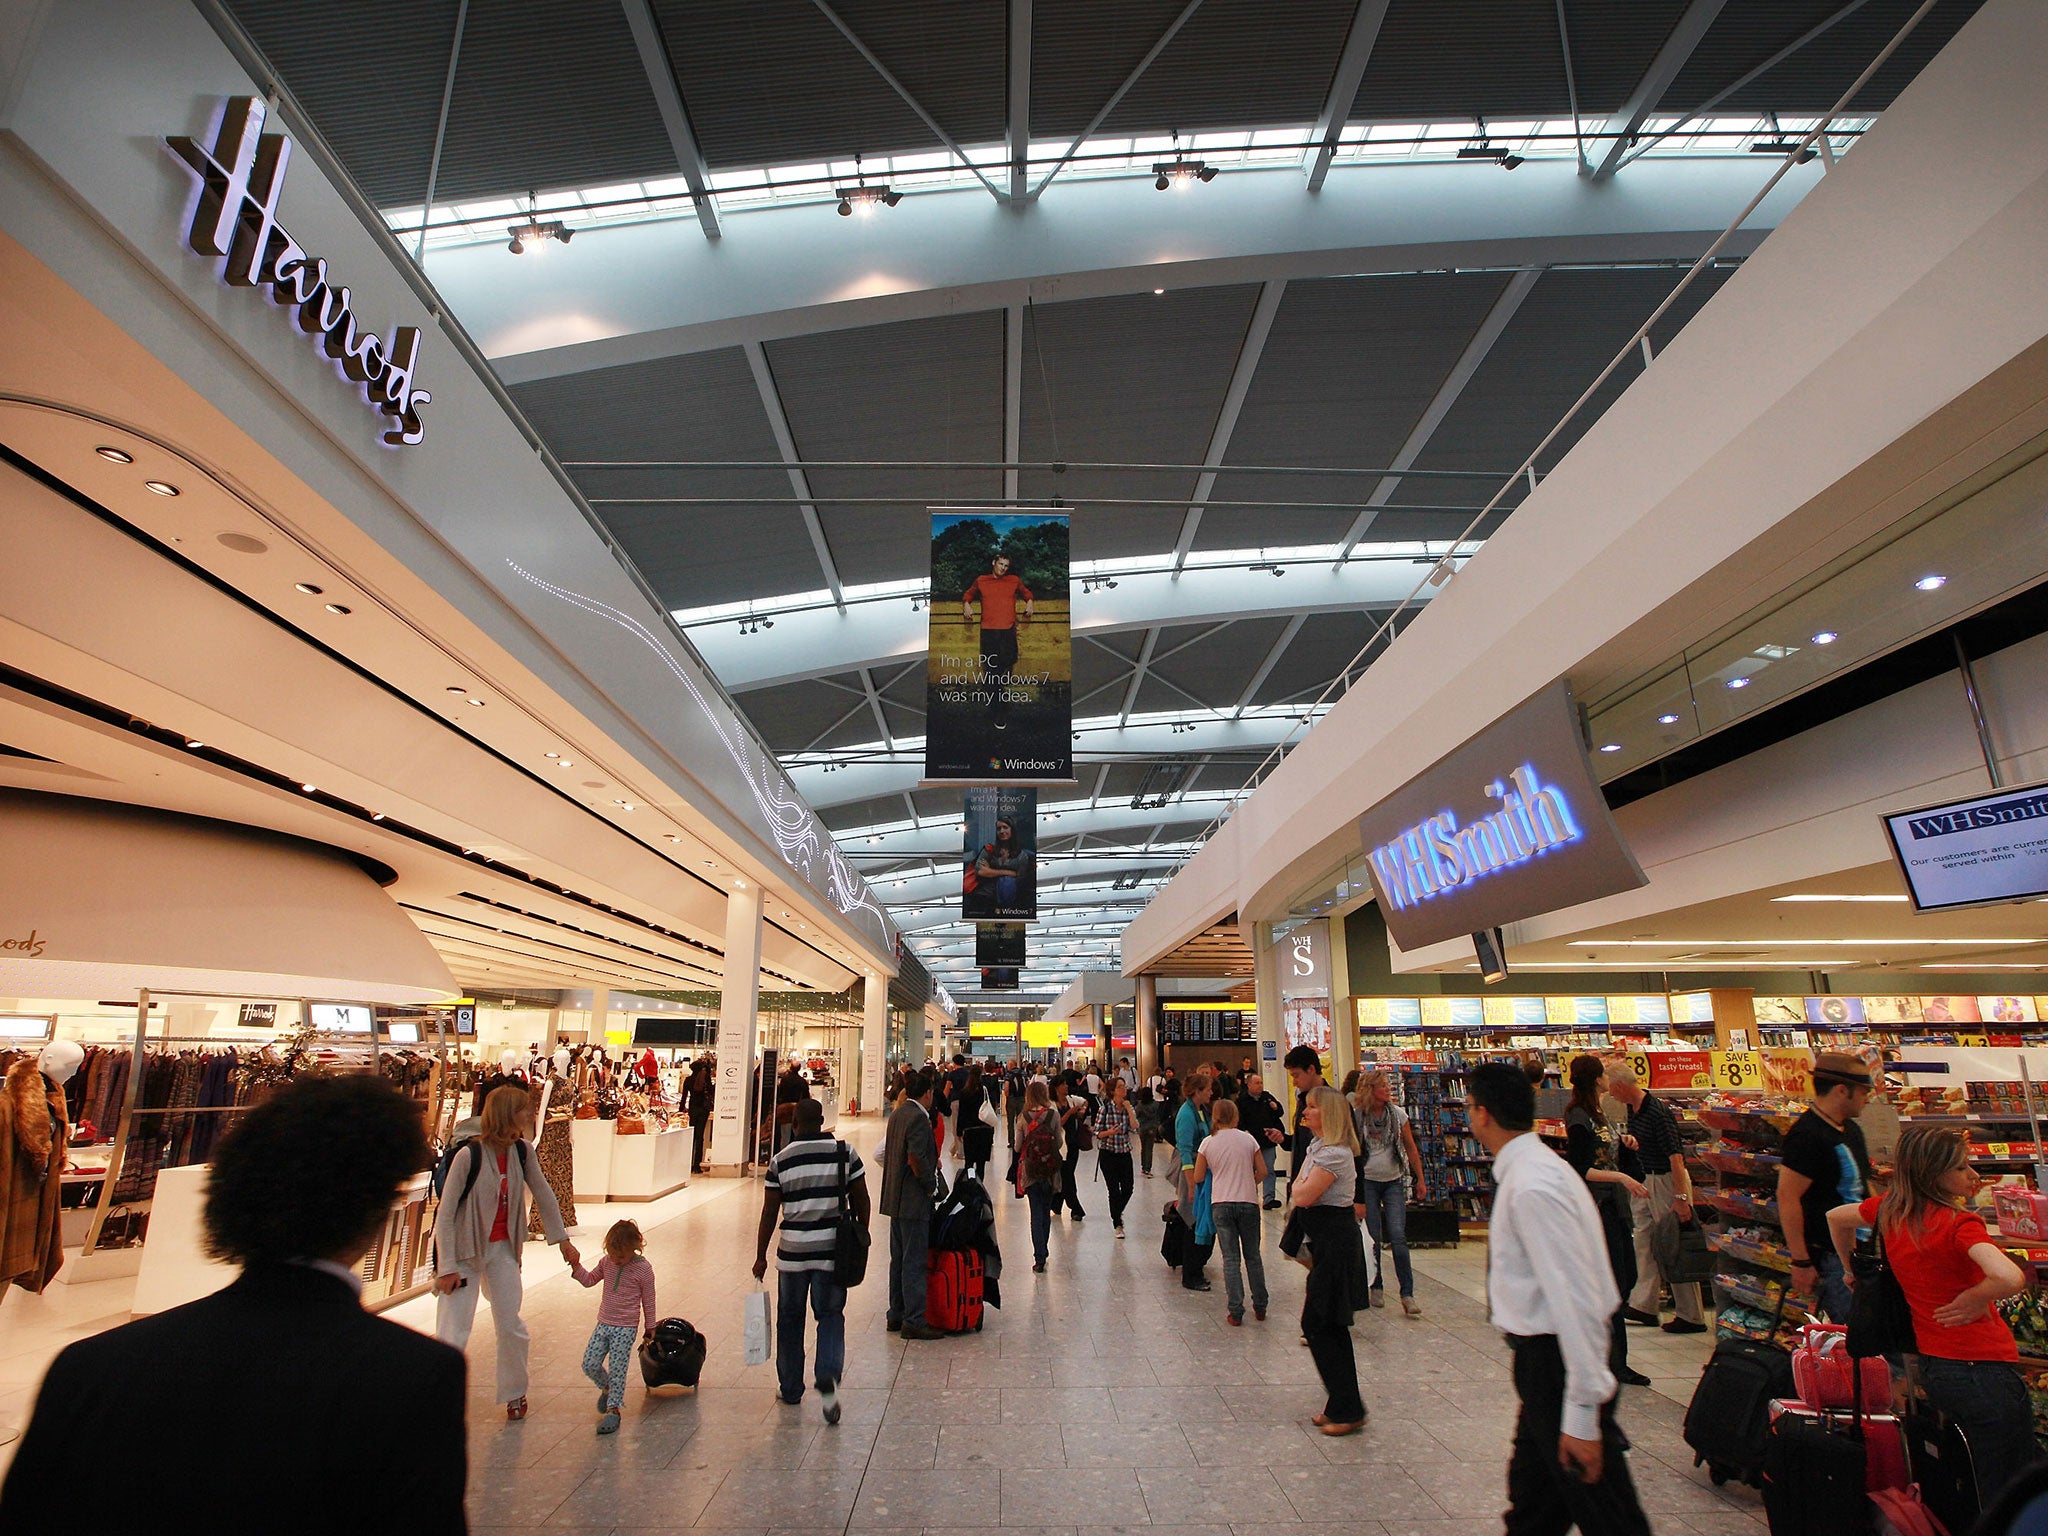 The man cut himself near the departure lounges of Heathrow Terminal 5 at 5.45pm on Wednesday